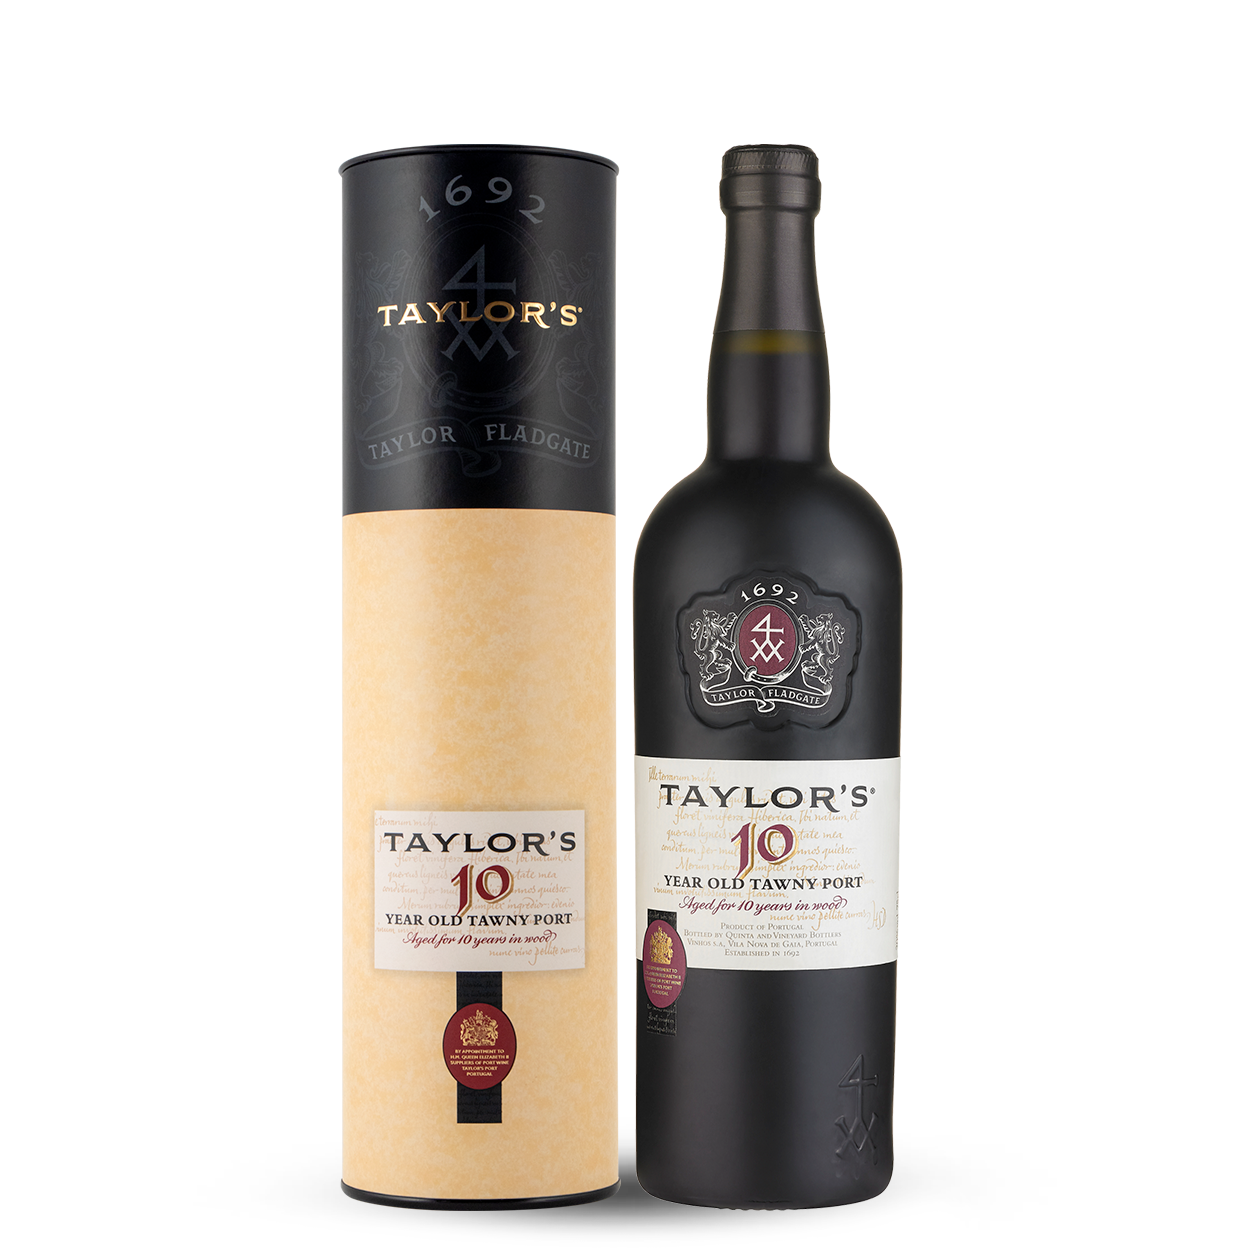 Taylor’s 10 year old Tawny Port